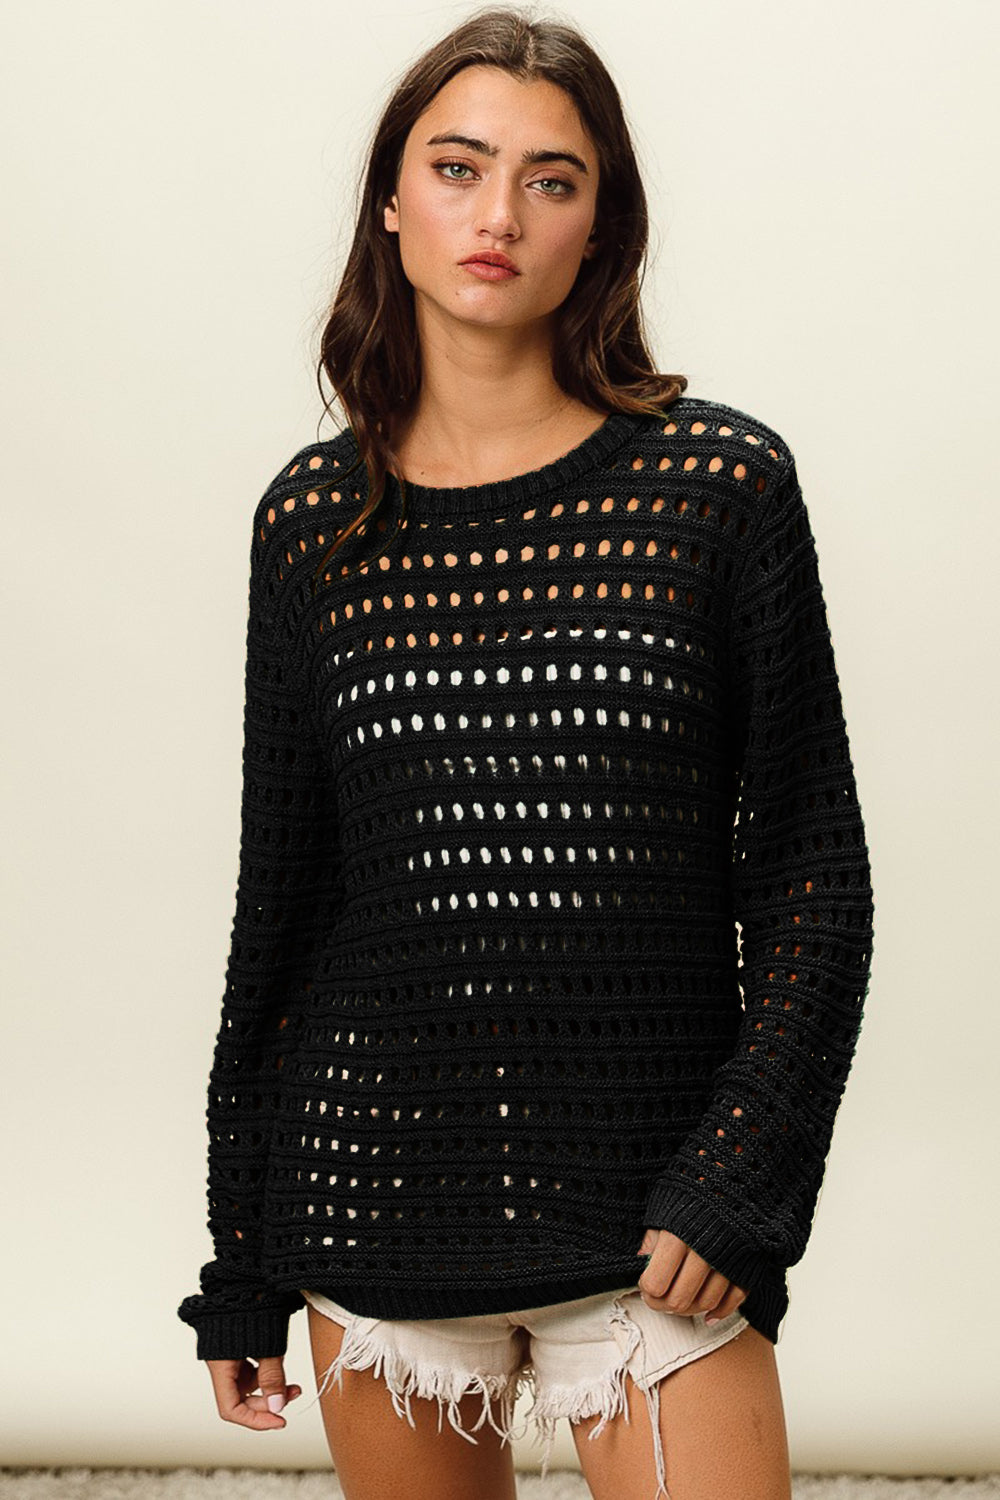 Round Neck Openwork Knit Cover Up